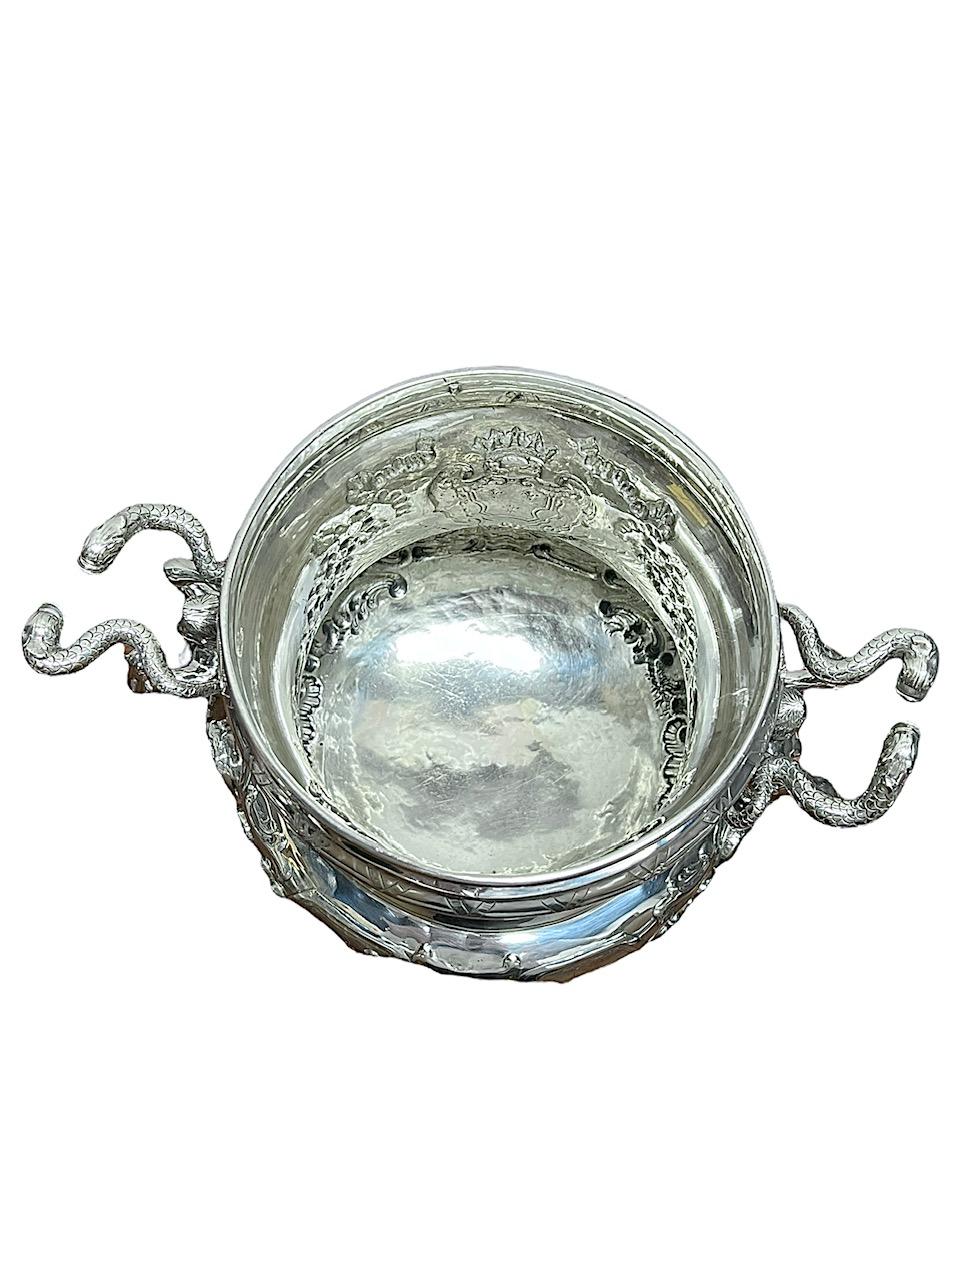 1890 Pair of German Solid Sterling Silver Coolers (Buckets), Sea Creatures For Sale 8